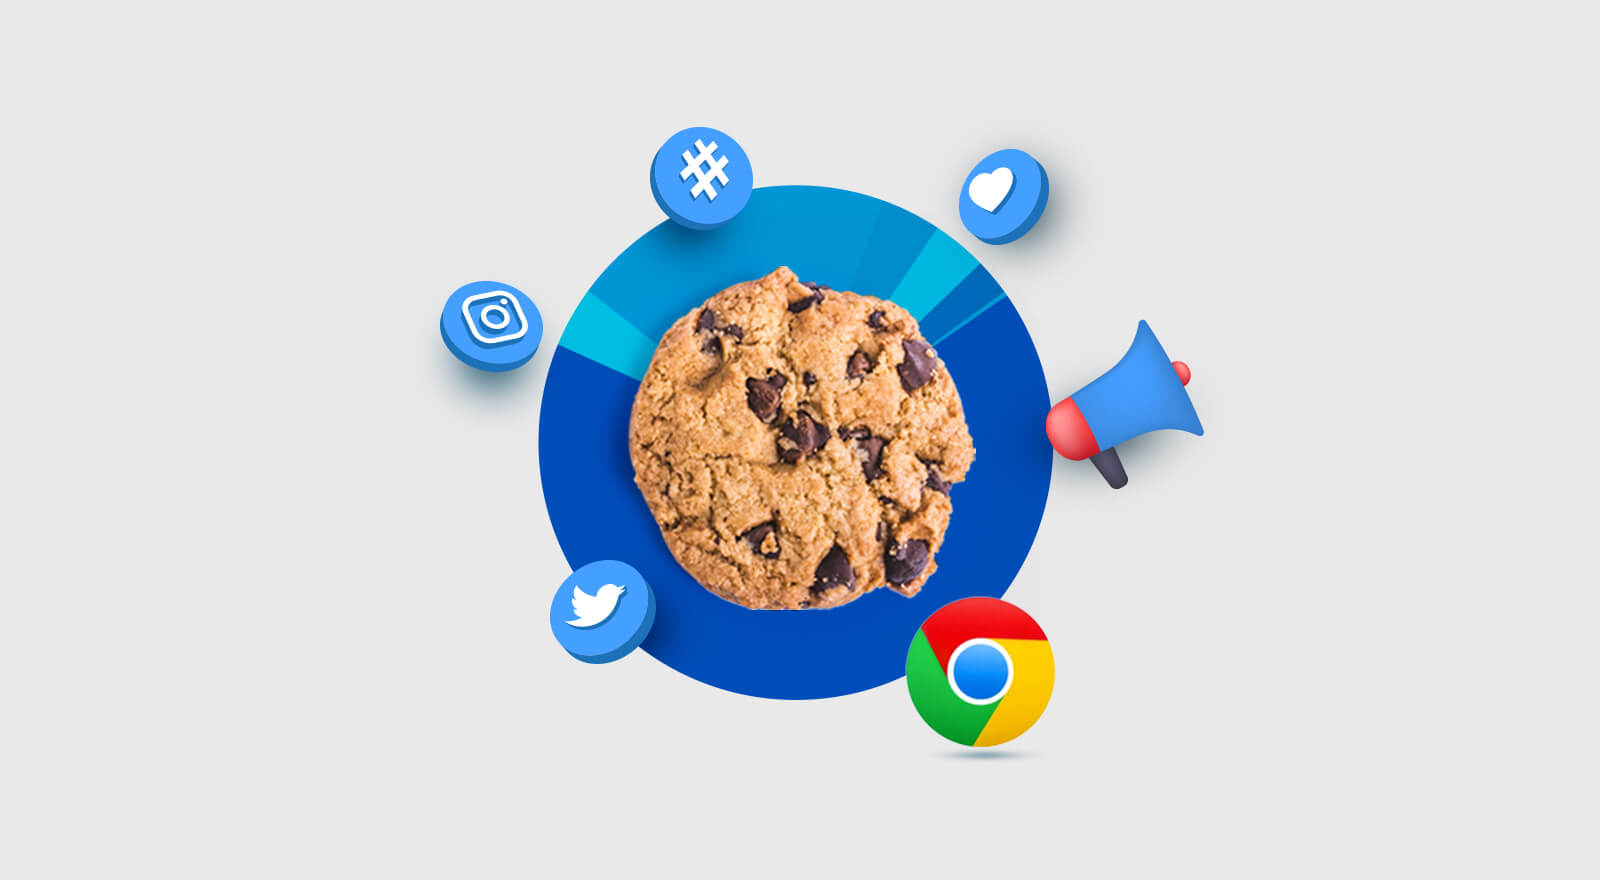 How the end of third party cookies in Chrome will affect digital marketing